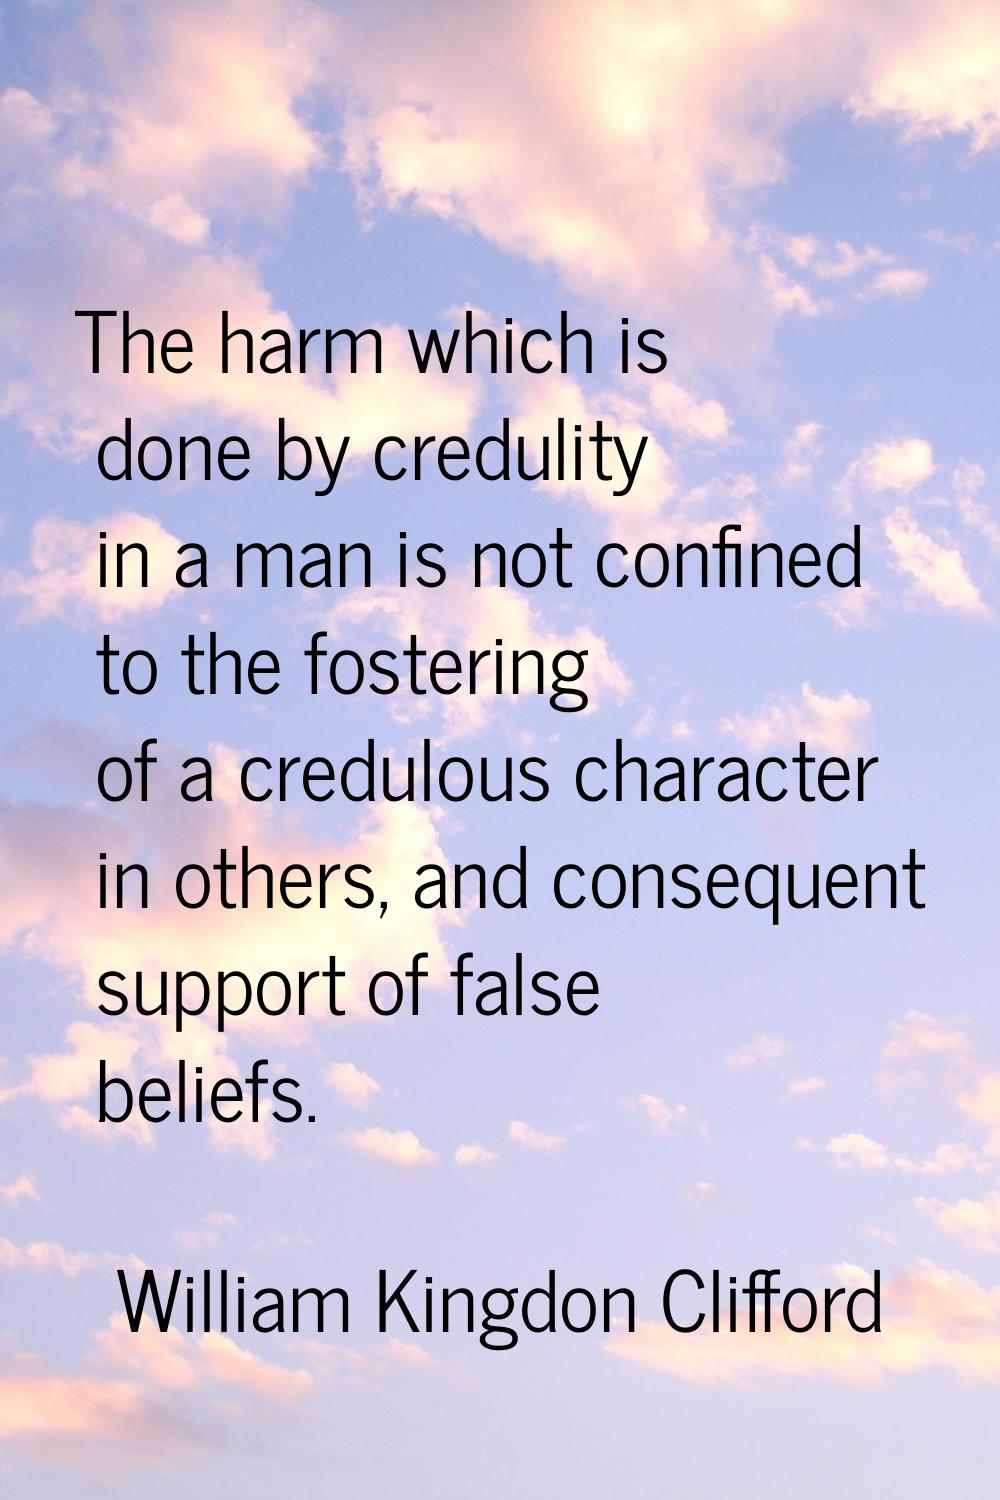 The harm which is done by credulity in a man is not confined to the fostering of a credulous charac